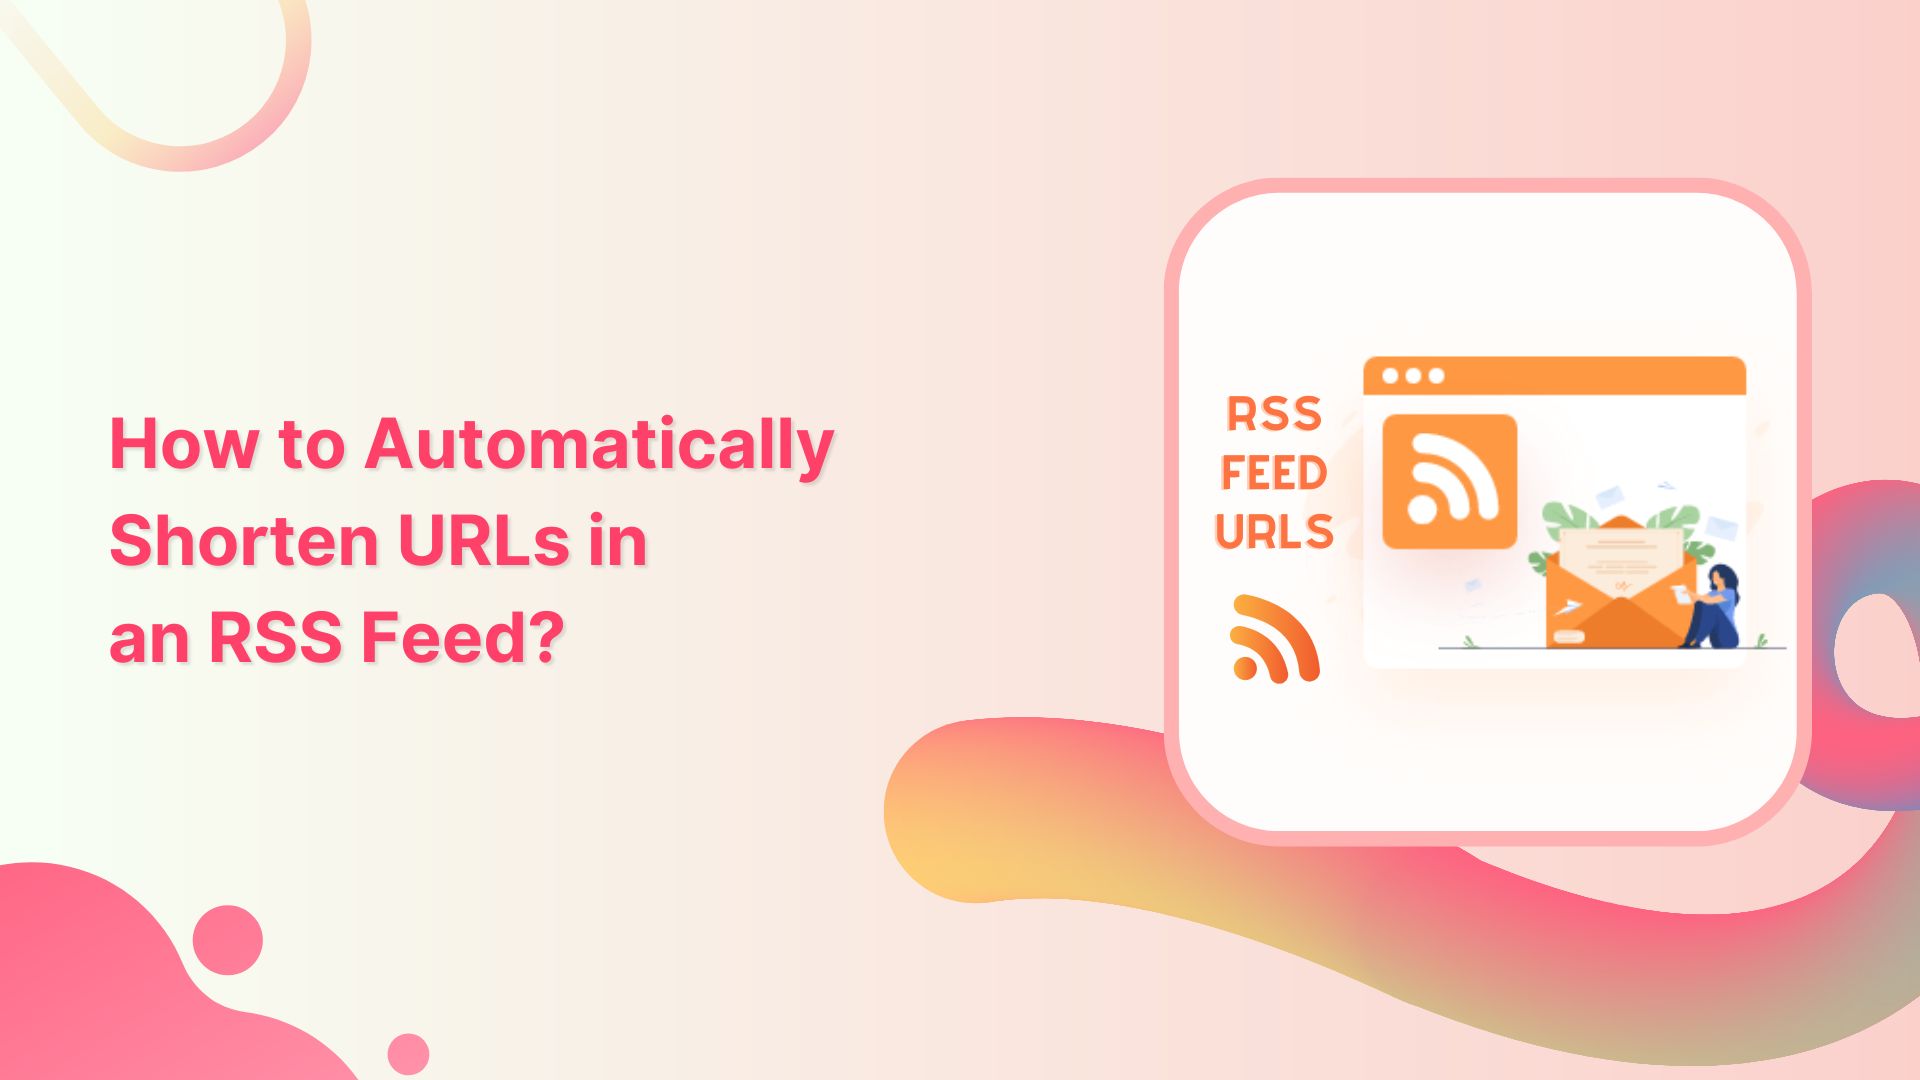 how to automatically shorten URLs in an rss feed